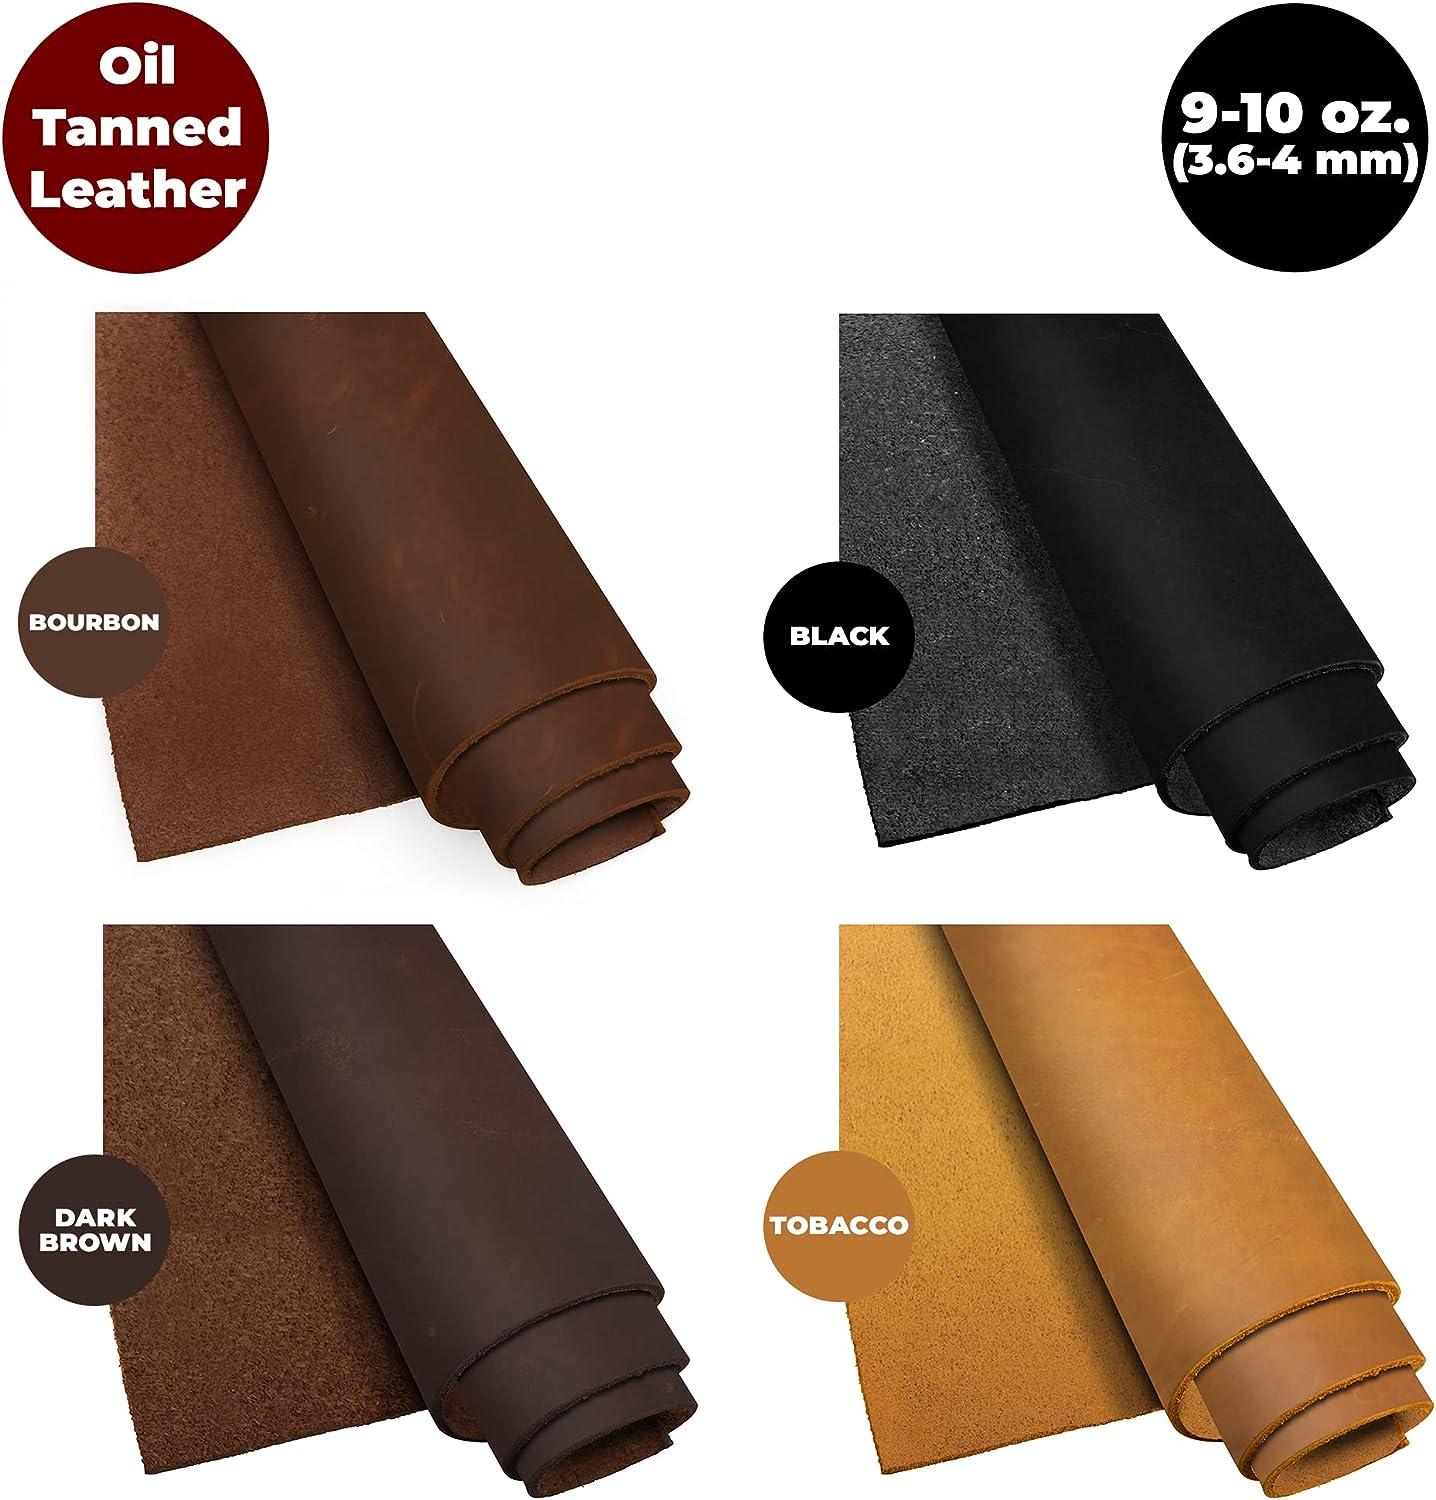 Hide & Drink, Leather Scraps with Scars for Arts & Crafts, Up to (5 in.) Long, Different Widths (12 oz Pack) - Old Tobacco